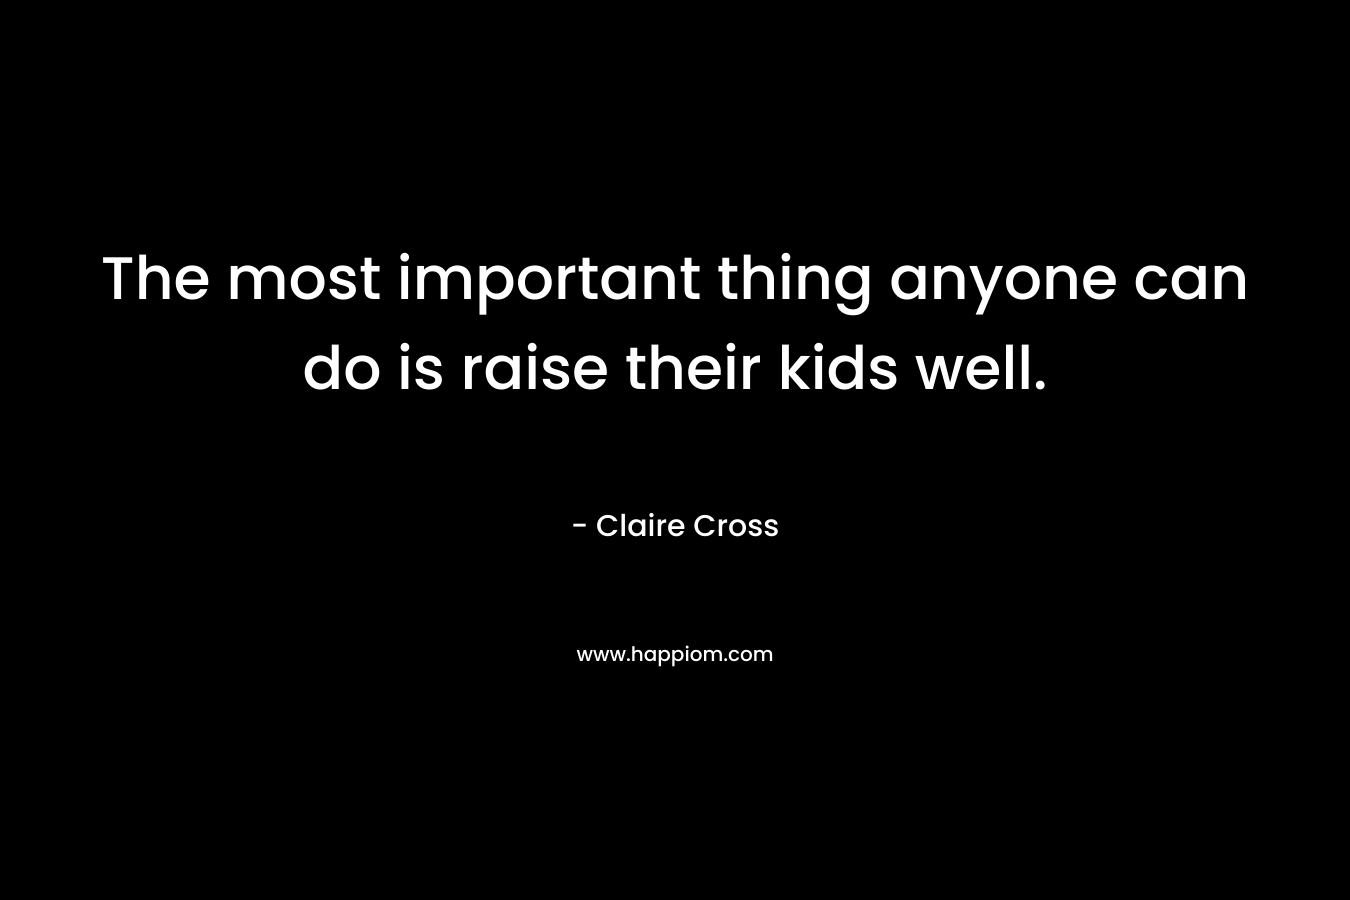 The most important thing anyone can do is raise their kids well.